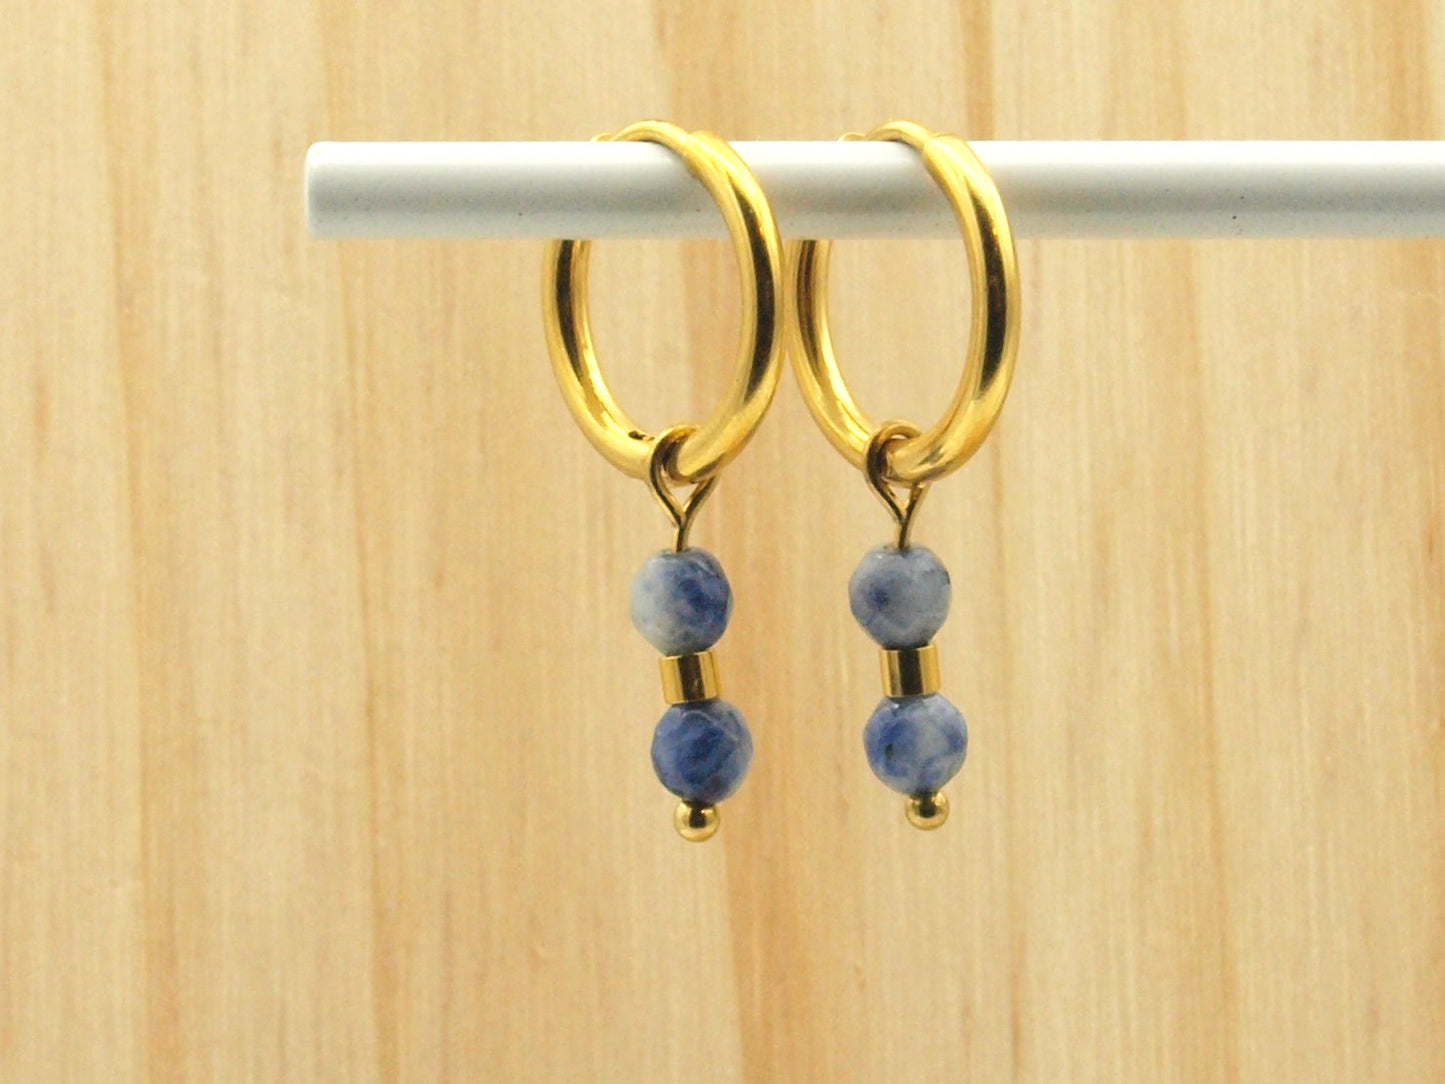 Earrings Indah natural stone, silver or gold stainless steel